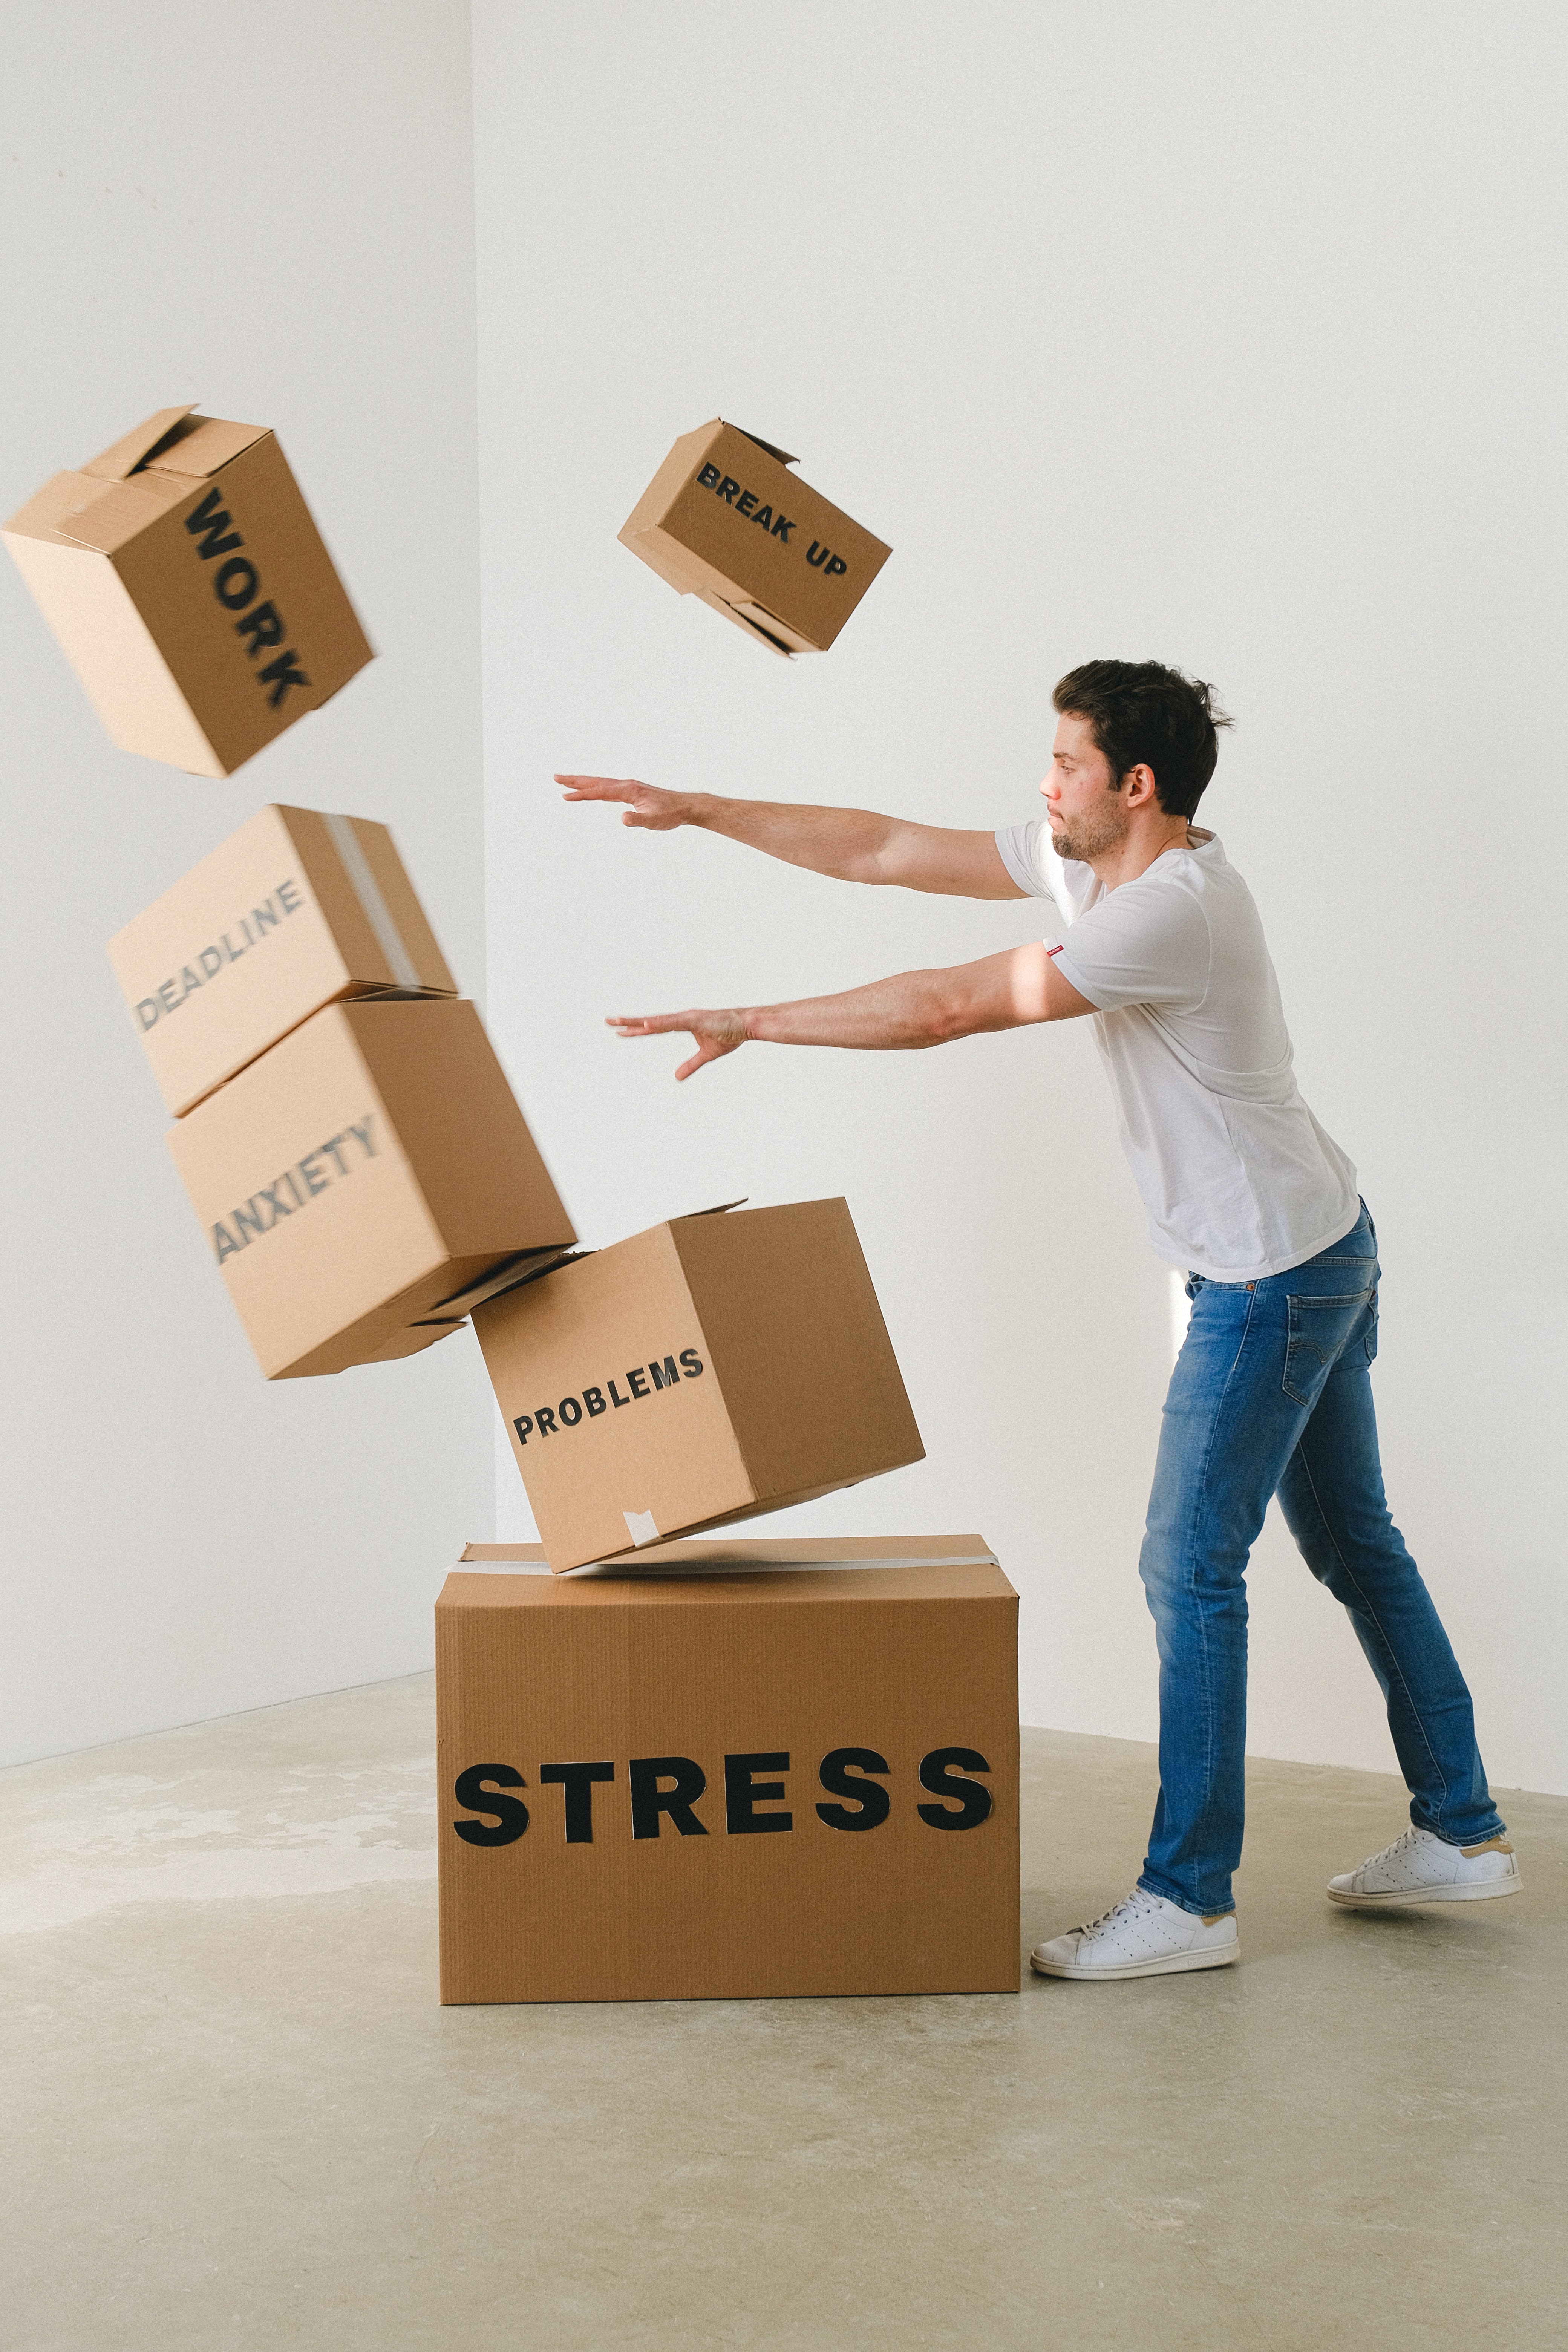 Boxes labeled with stress, work, and other things that can cause anxiety being knocked over by a man